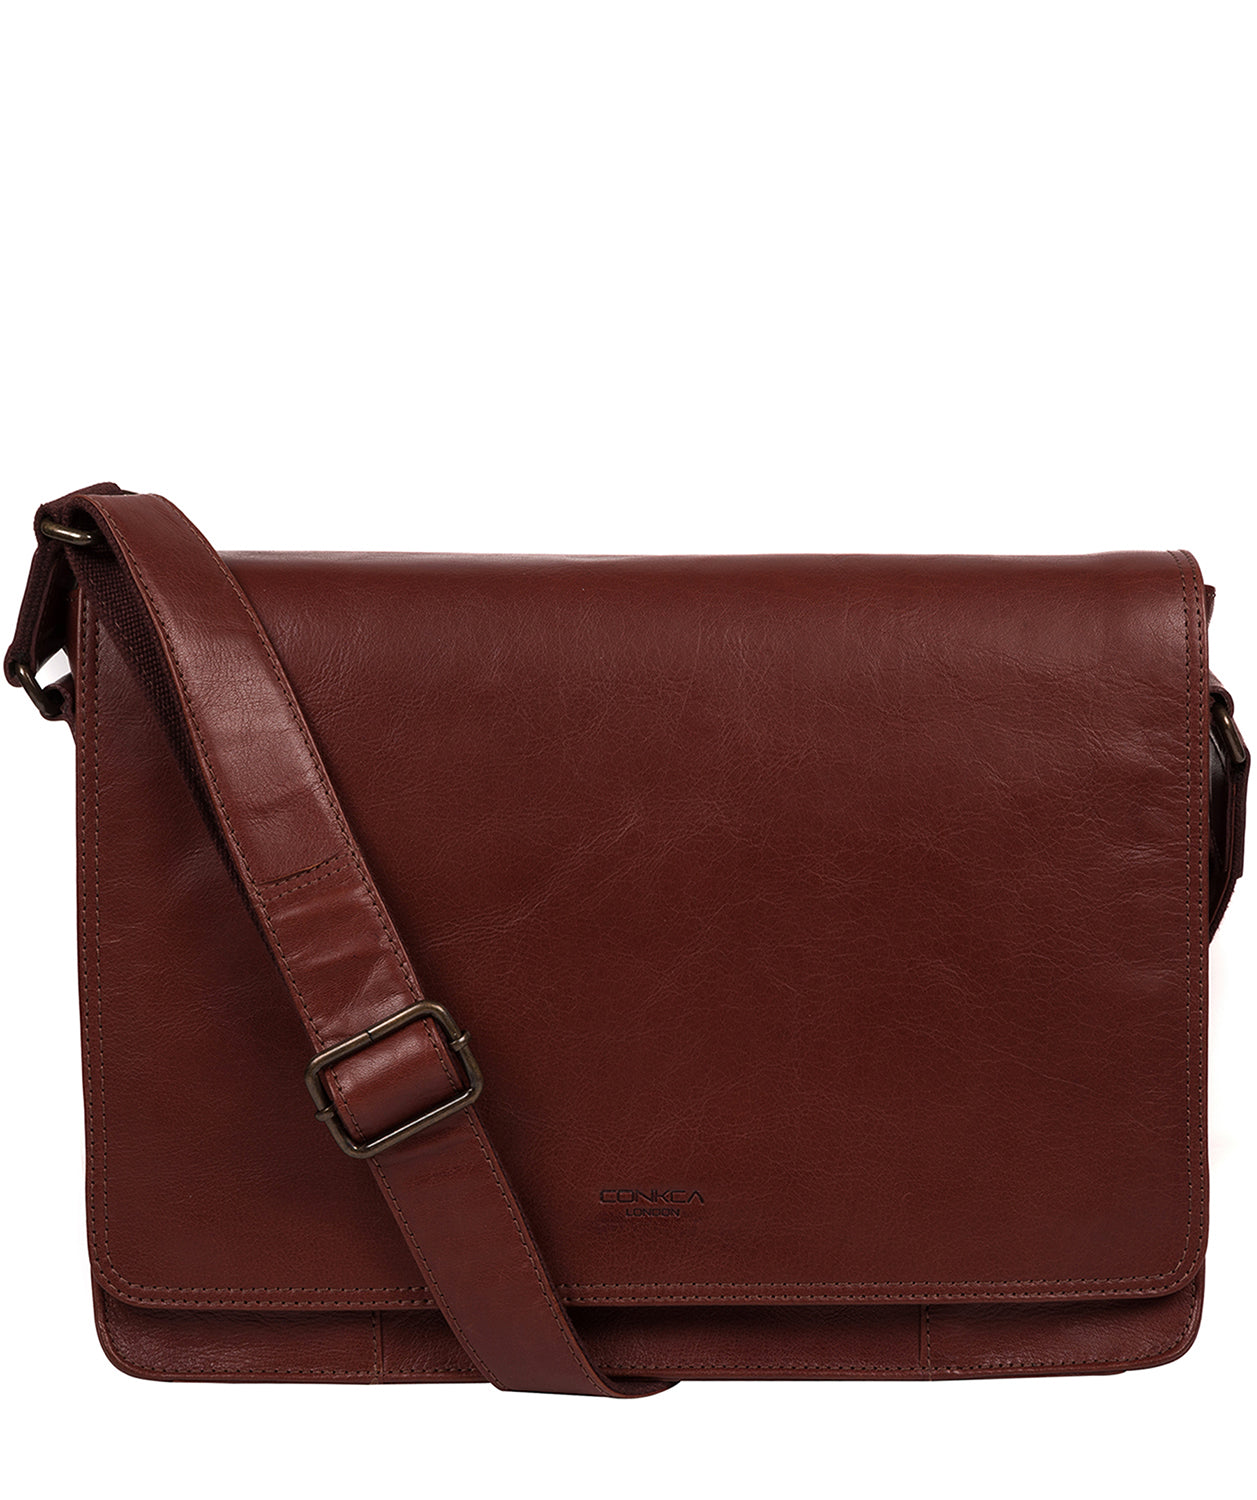 Brown Leather Messenger Bag 'Zagallo' by Conkca London – Pure Luxuries ...